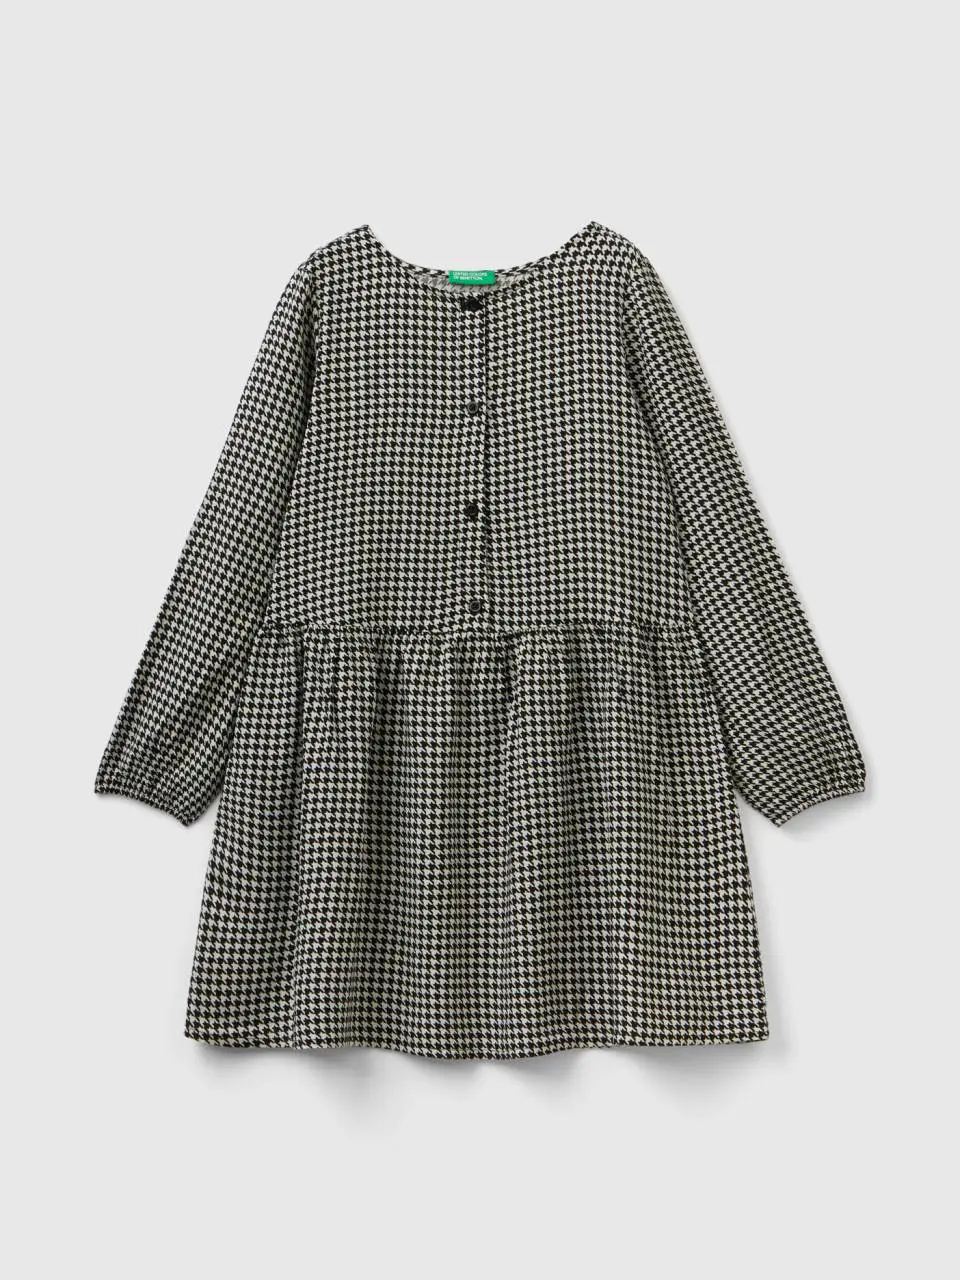 Benetton houndstooth dress in sustainable viscose. 1